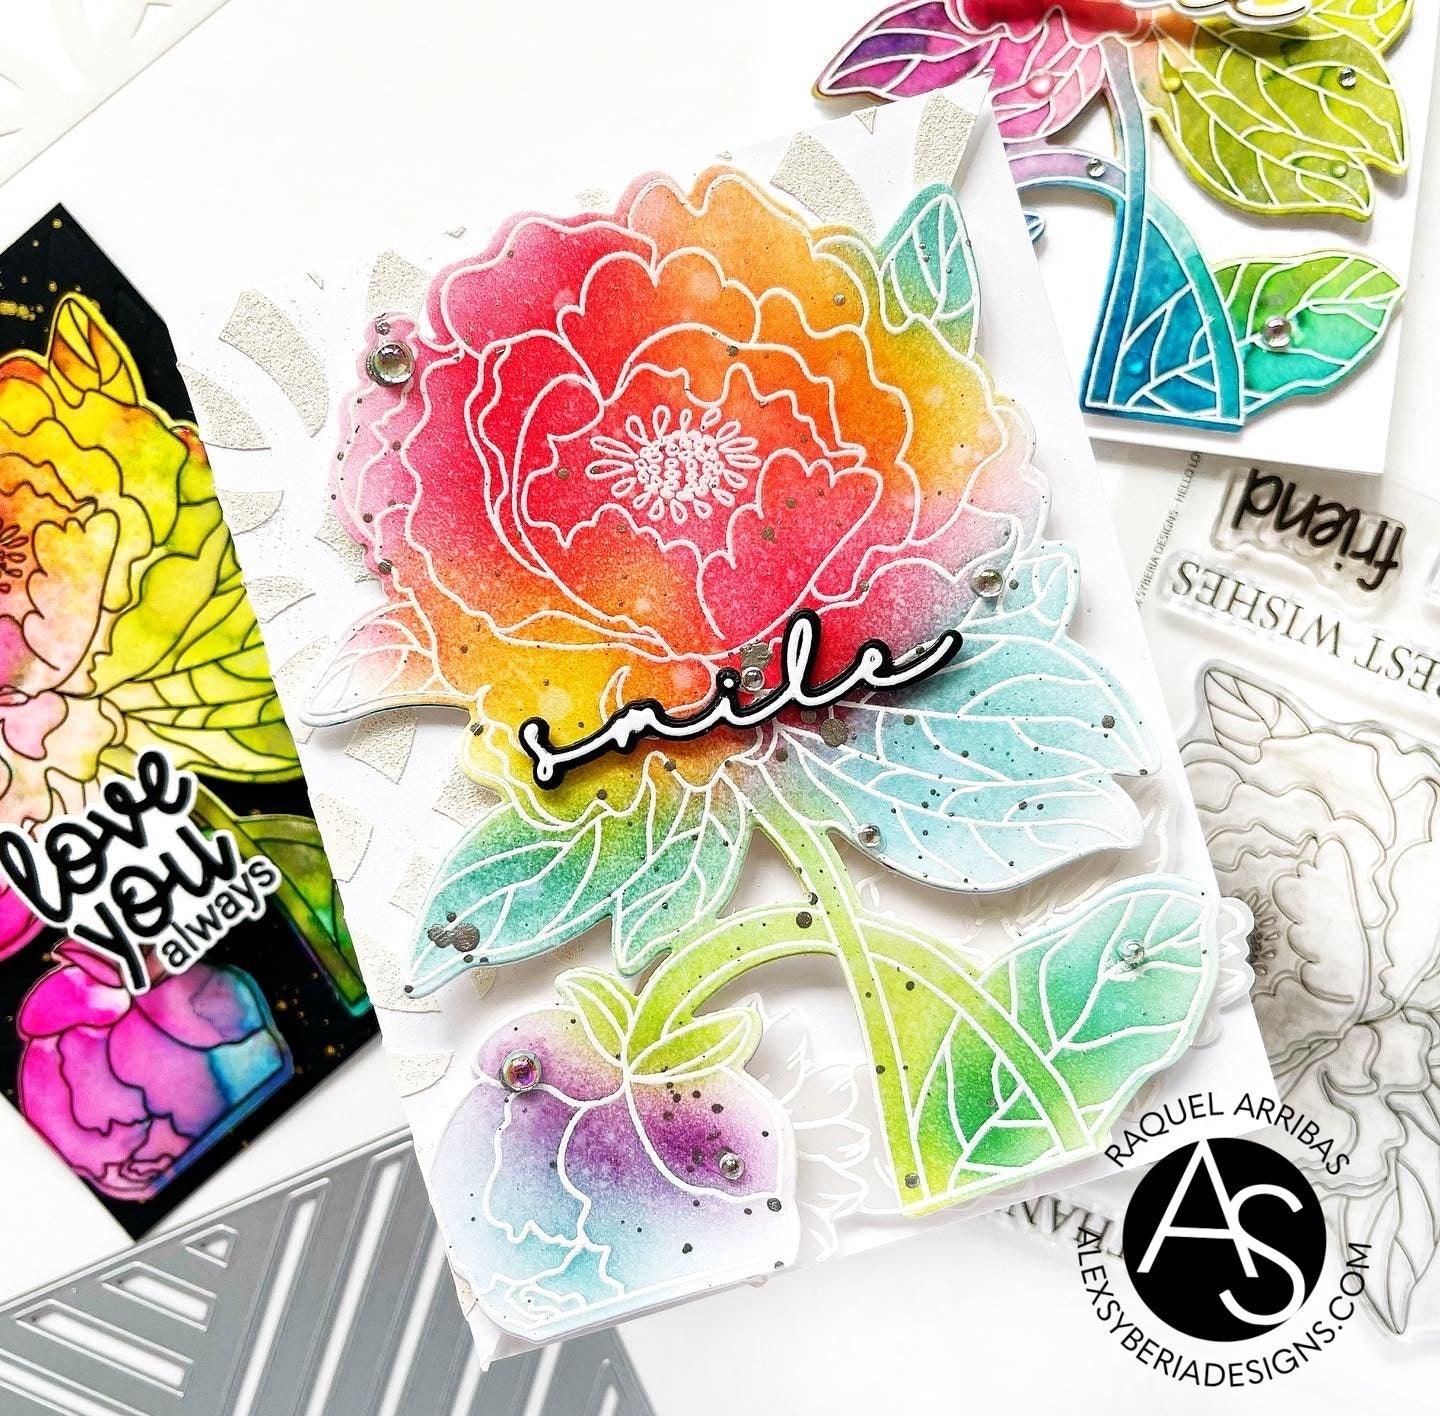 alex-syberia-designs-stamps-hello-lovely-fancy-background-die-cover-cardmaking-tutorials-tips-rainbow-cards-rainbow-dry-embossing-technique